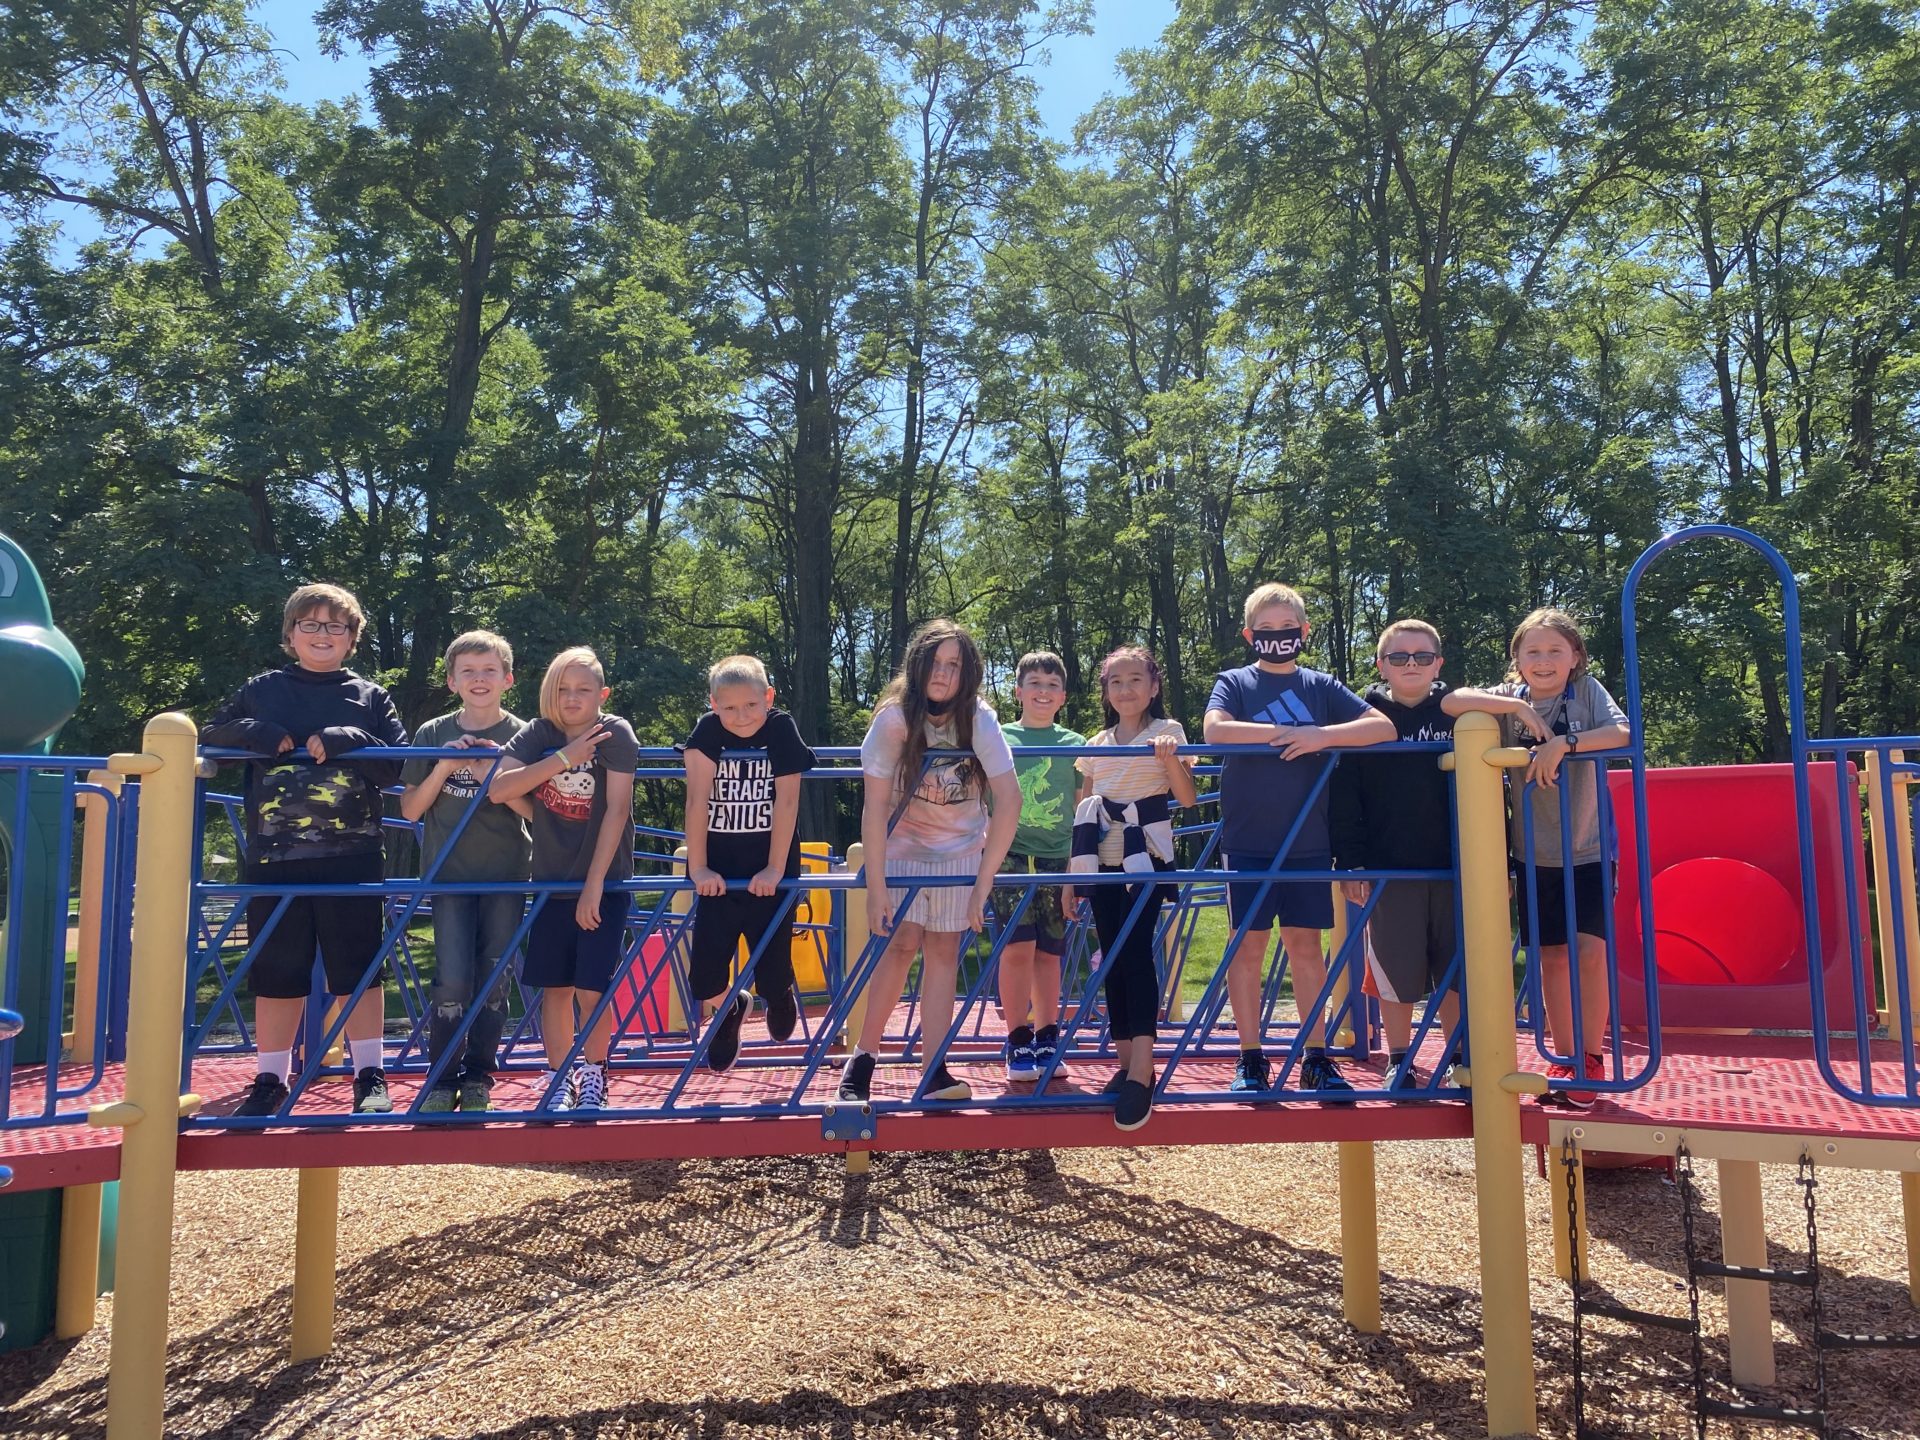 A group of students lined up on the playground bridge.